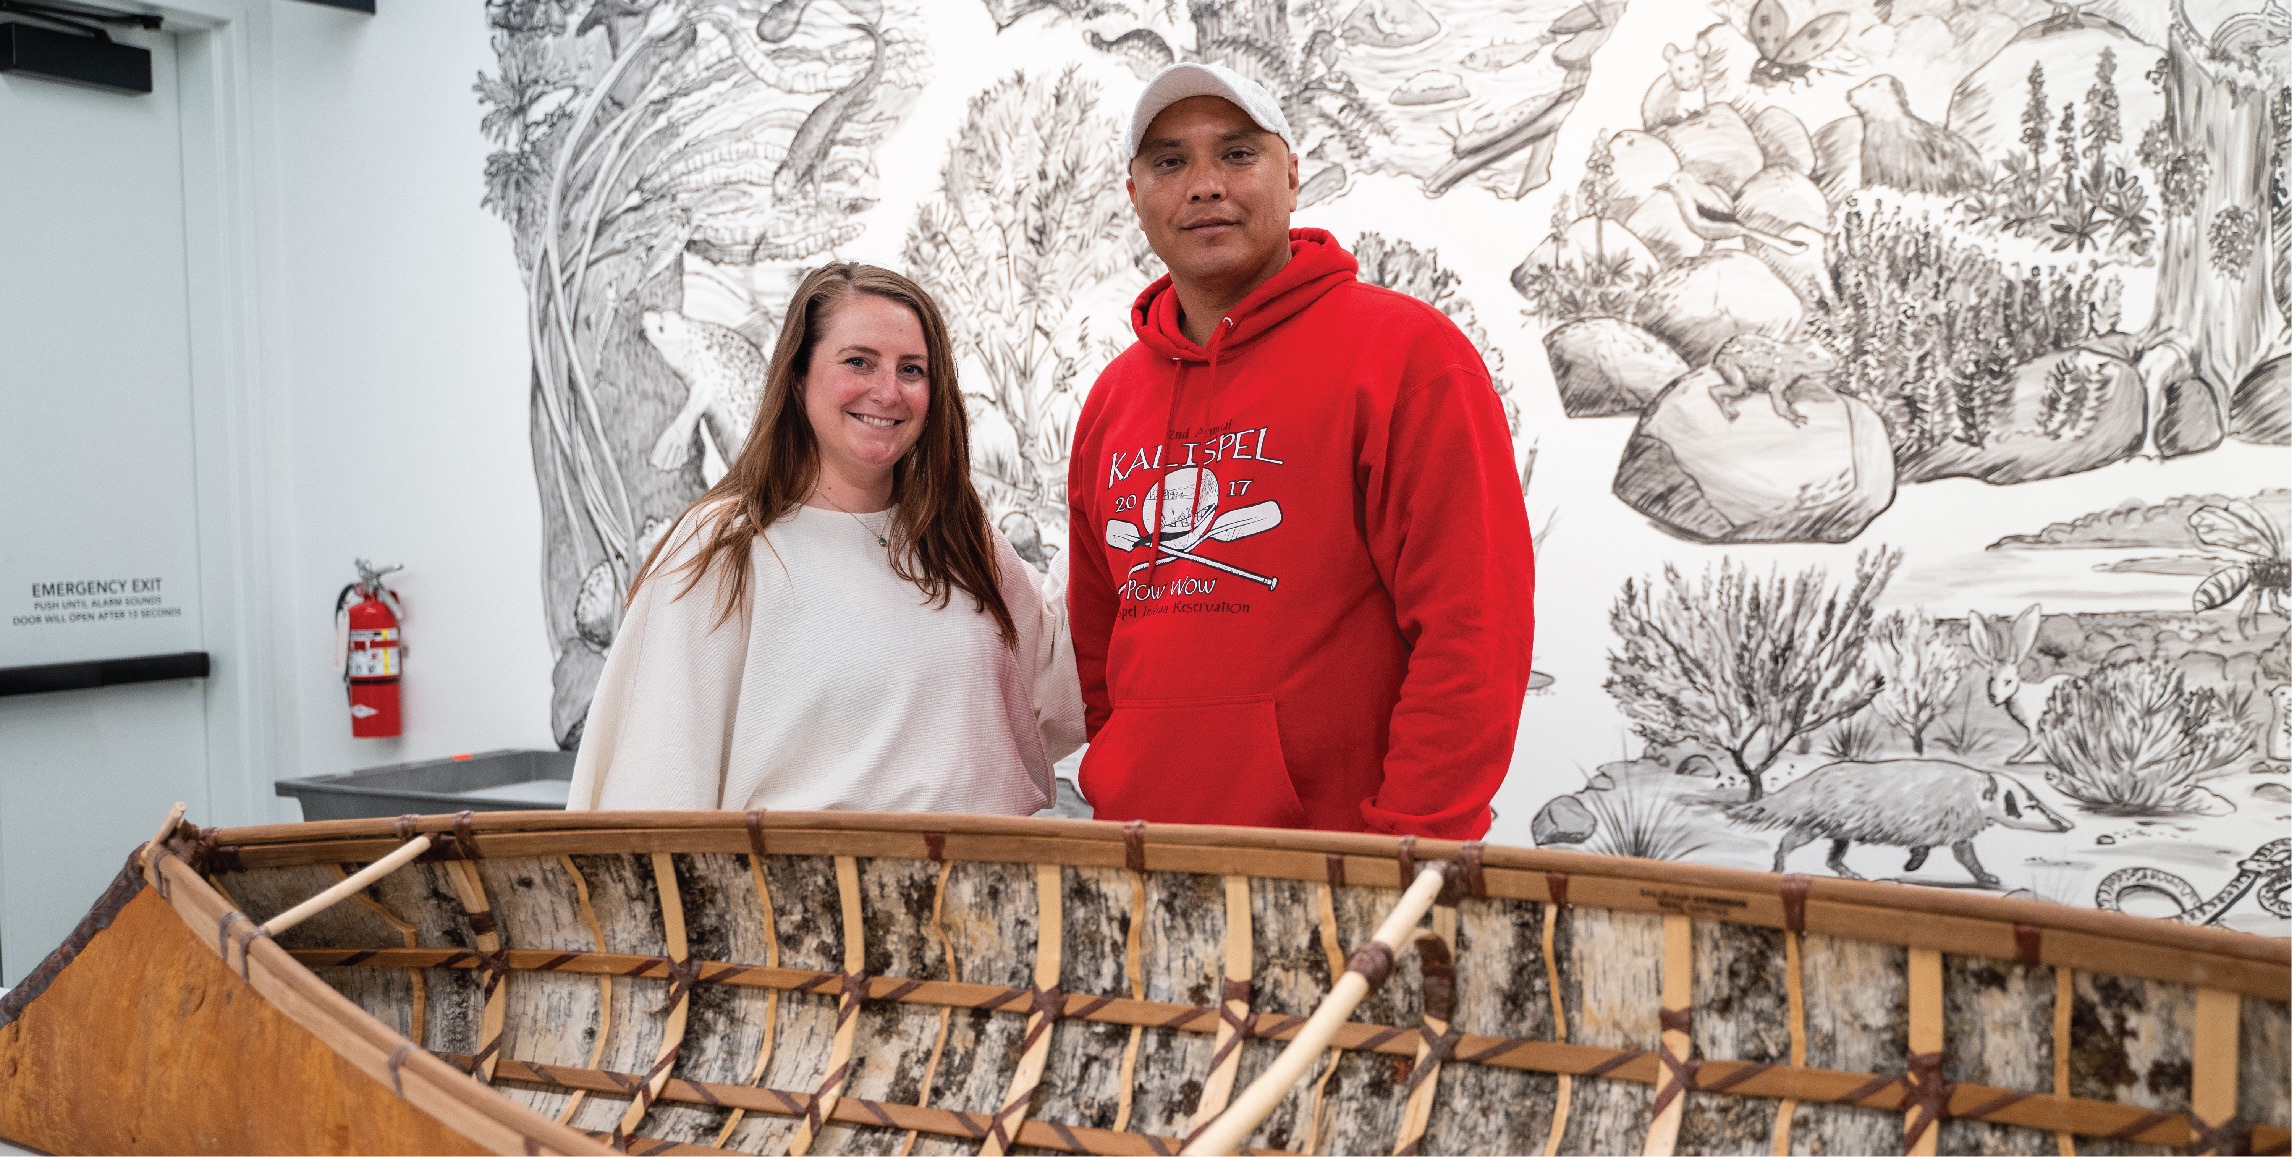 Shawn Brigman and Assistant Director for the Bill Holm Center Bridget Johnson pose together next to the bark sturgeon-nose canoe.